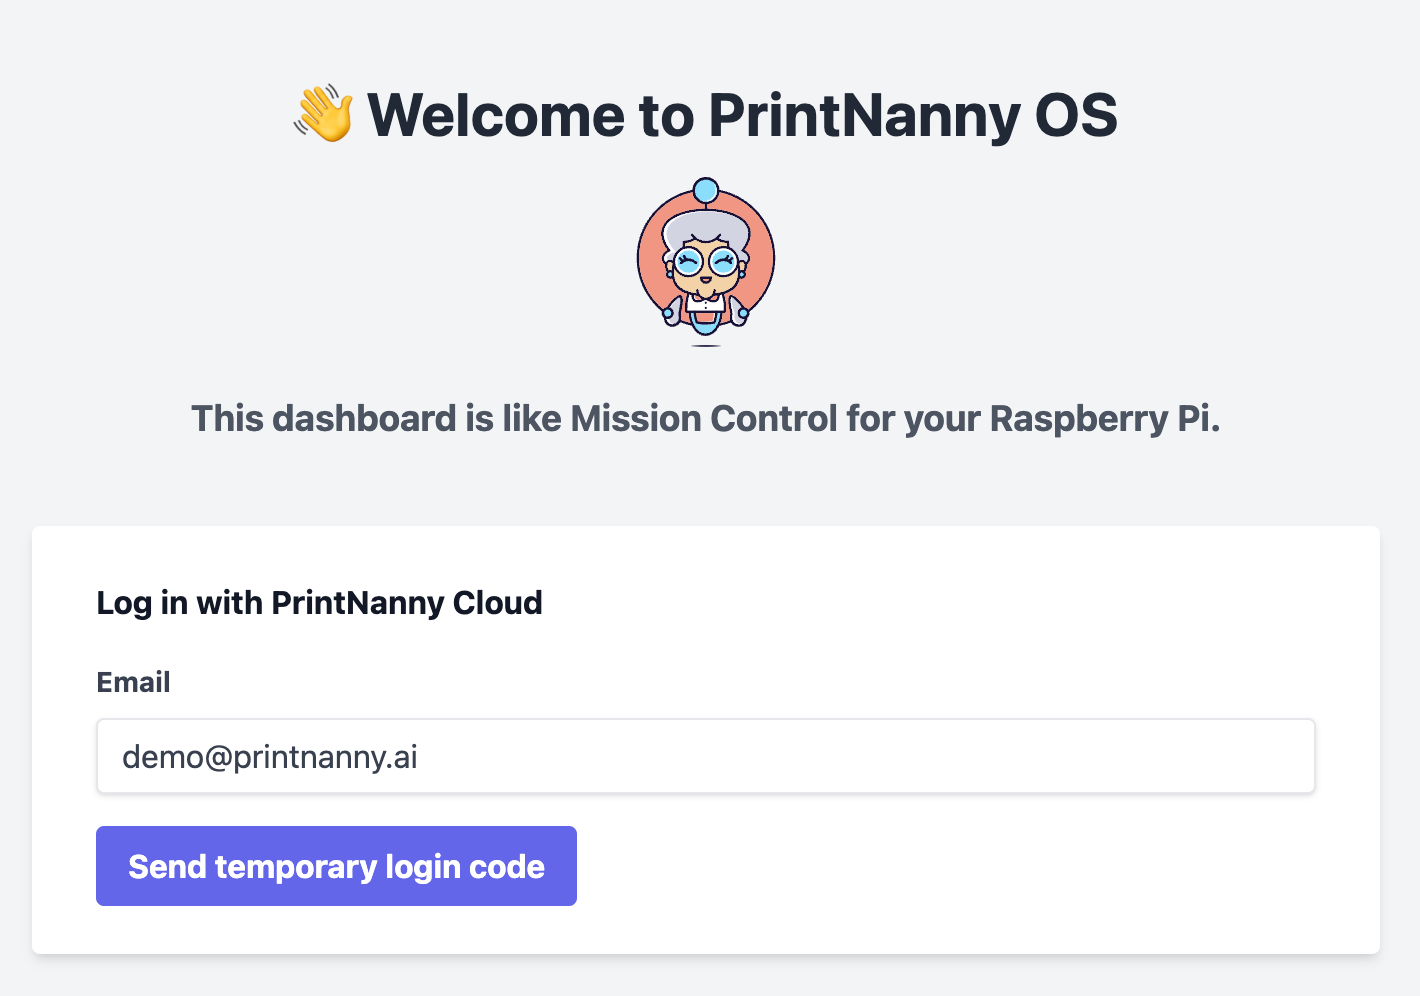 PrintNanny OS email login prompt